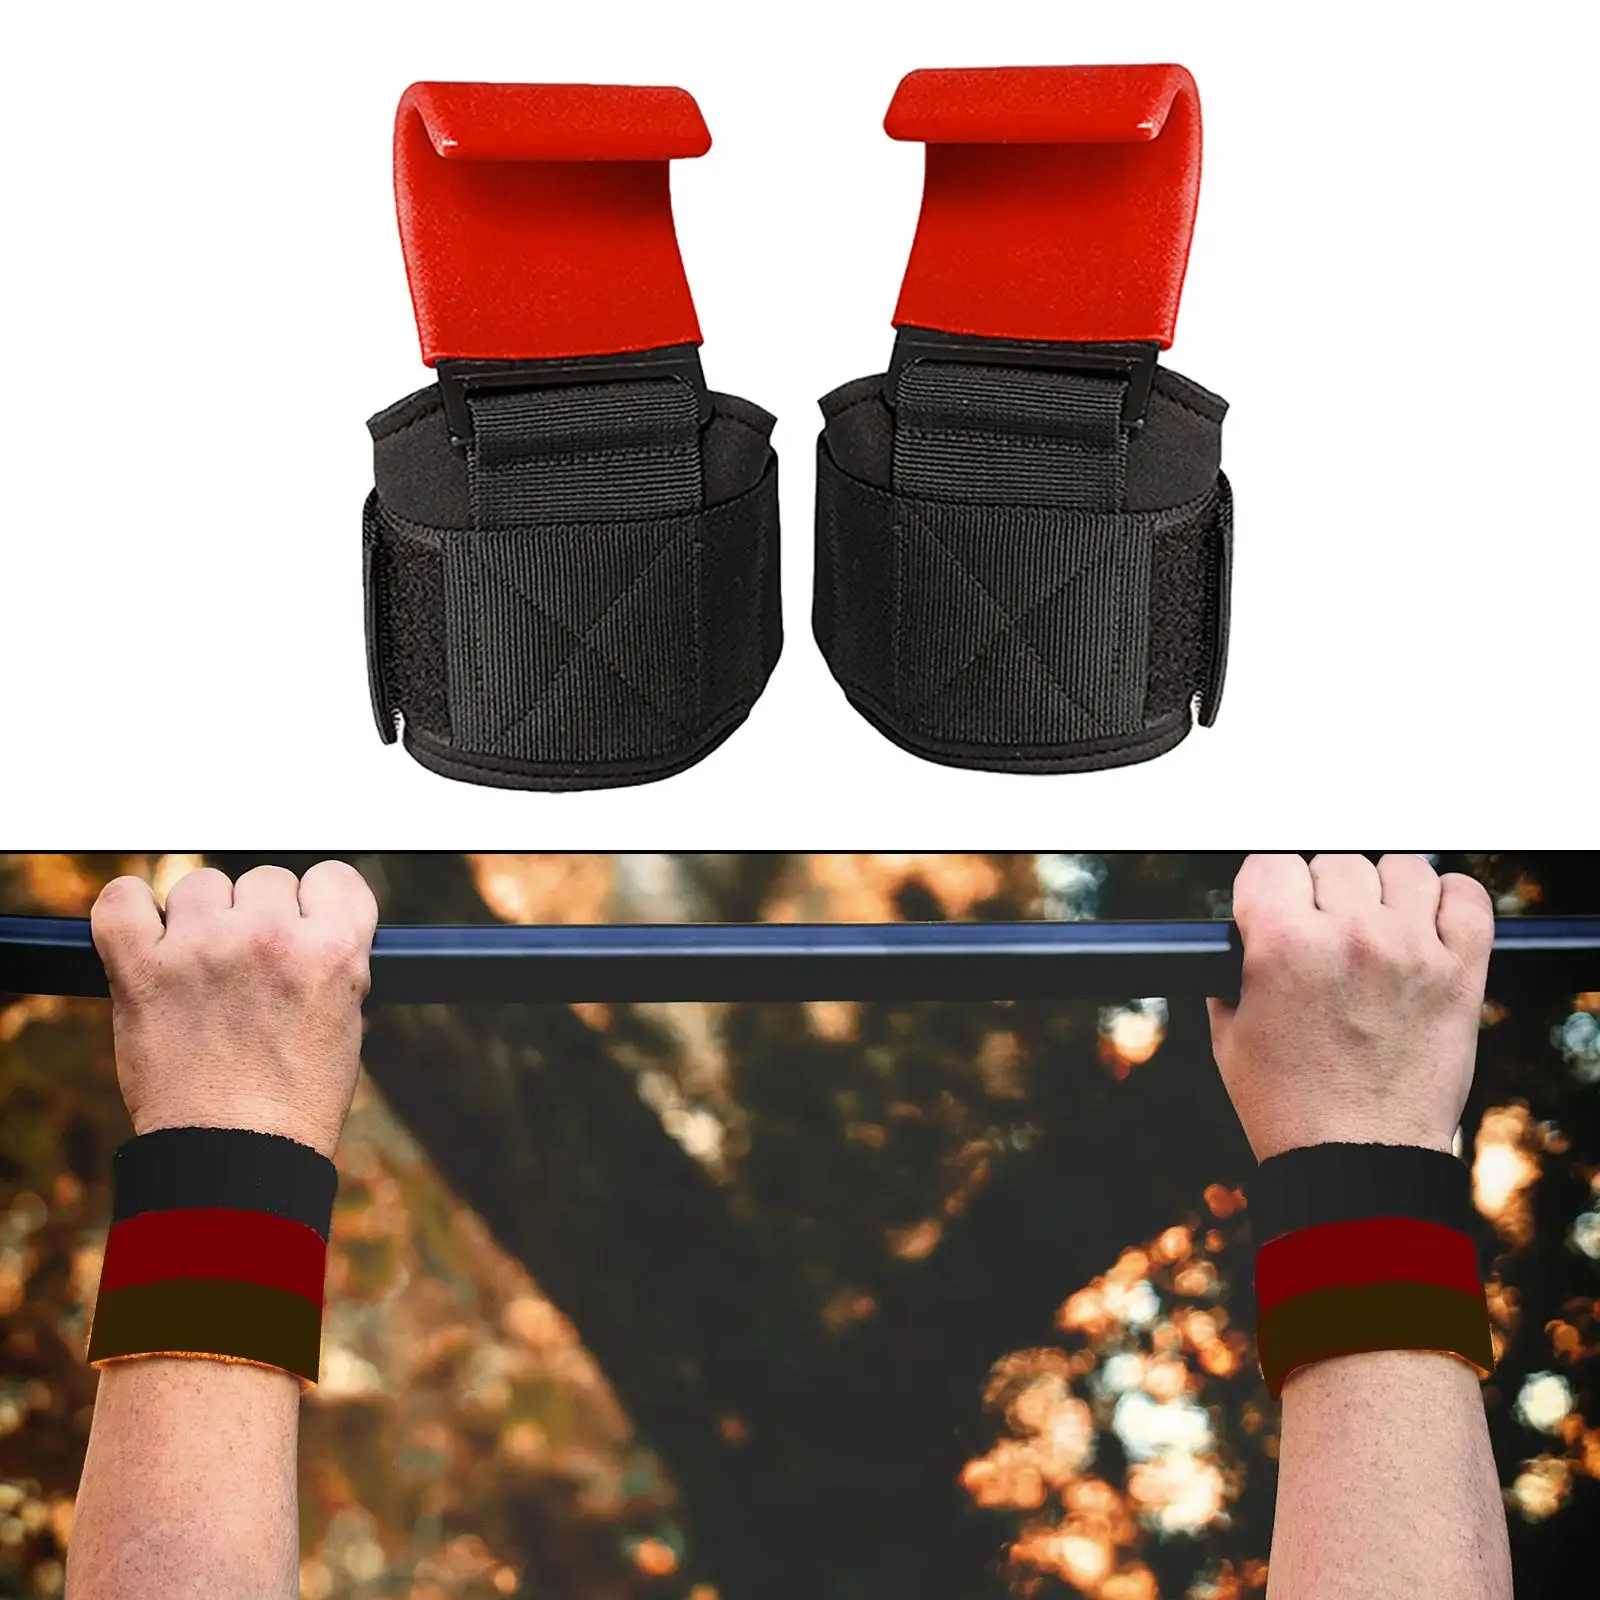 1 Pair Weight Lifting Hooks Wrist Wraps Gym Training Grip Straps for Fitness Padded Wrist Grips Bodybuilding Strength Training